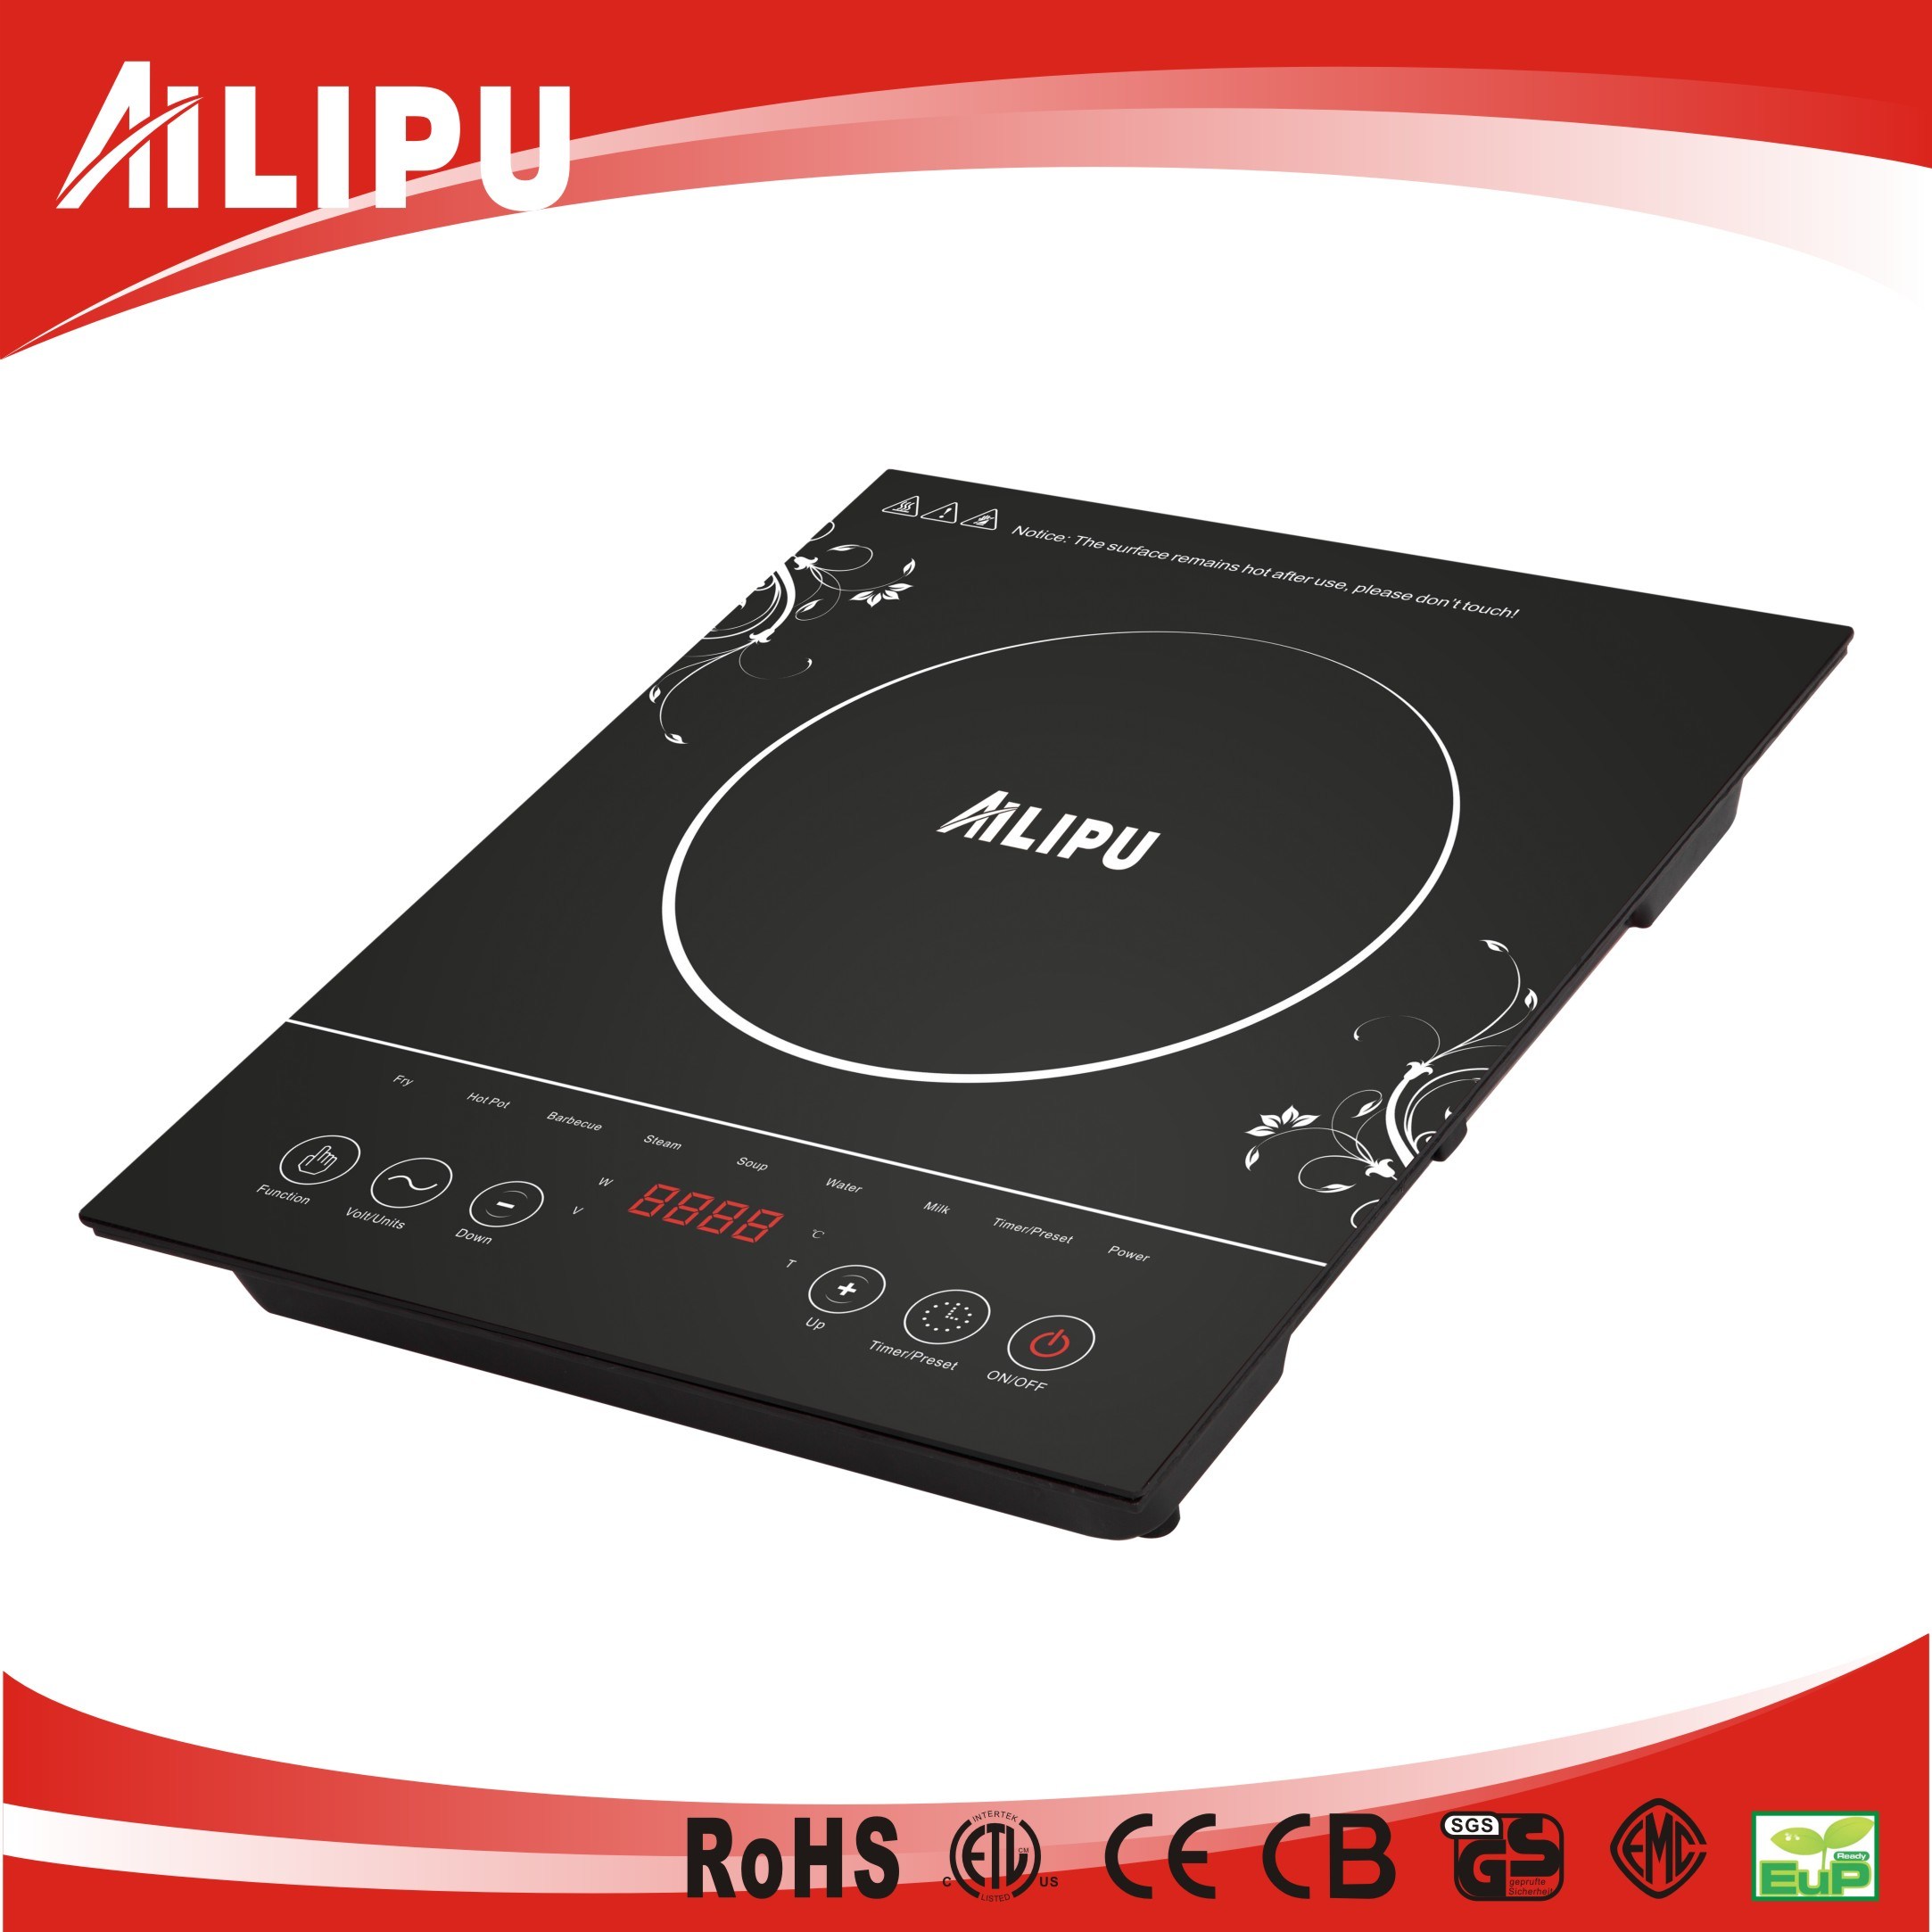 CB CE Approval Sensor Touch Control Induction Cooker for Kitchen Use